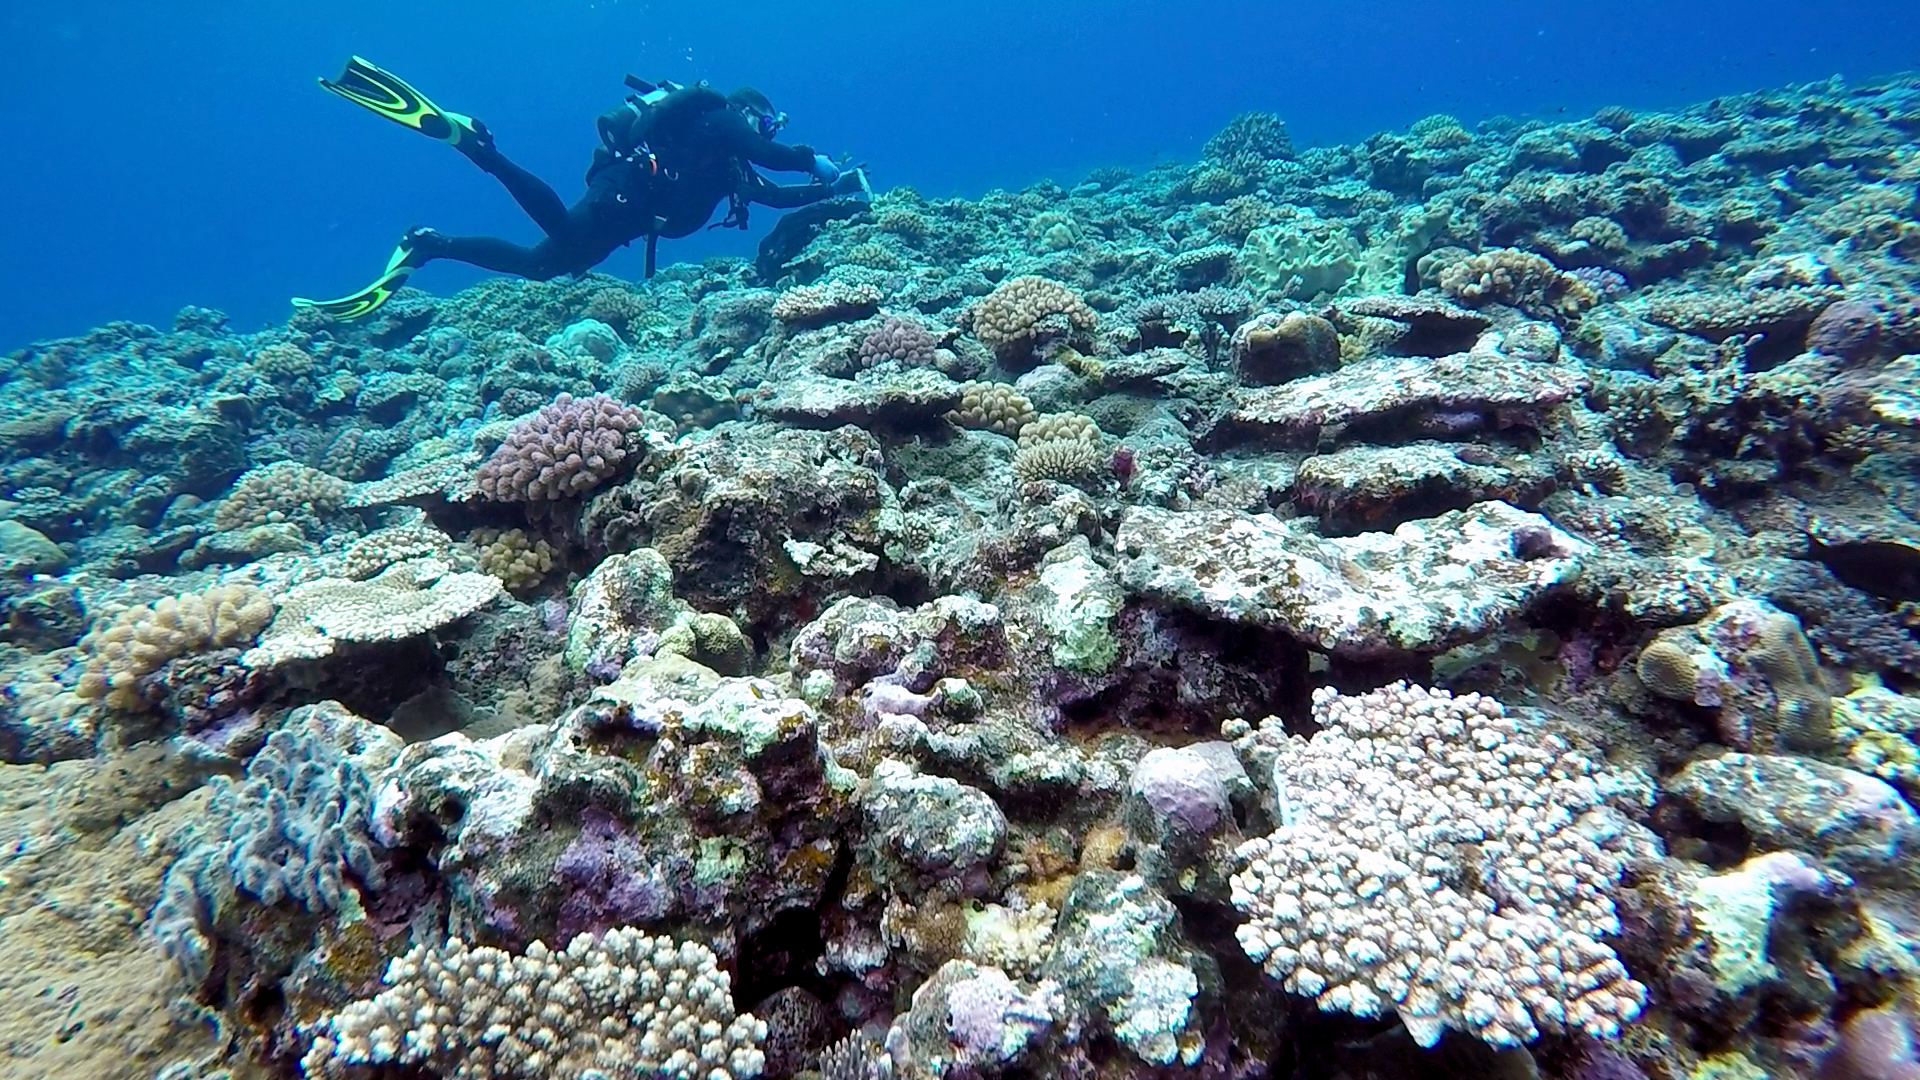 Prof. Alex Wyatt maintains shallow water temperature loggers in Funauki Bay, Iriomote Island, Japan to measure water temperatures at coral reef sites.